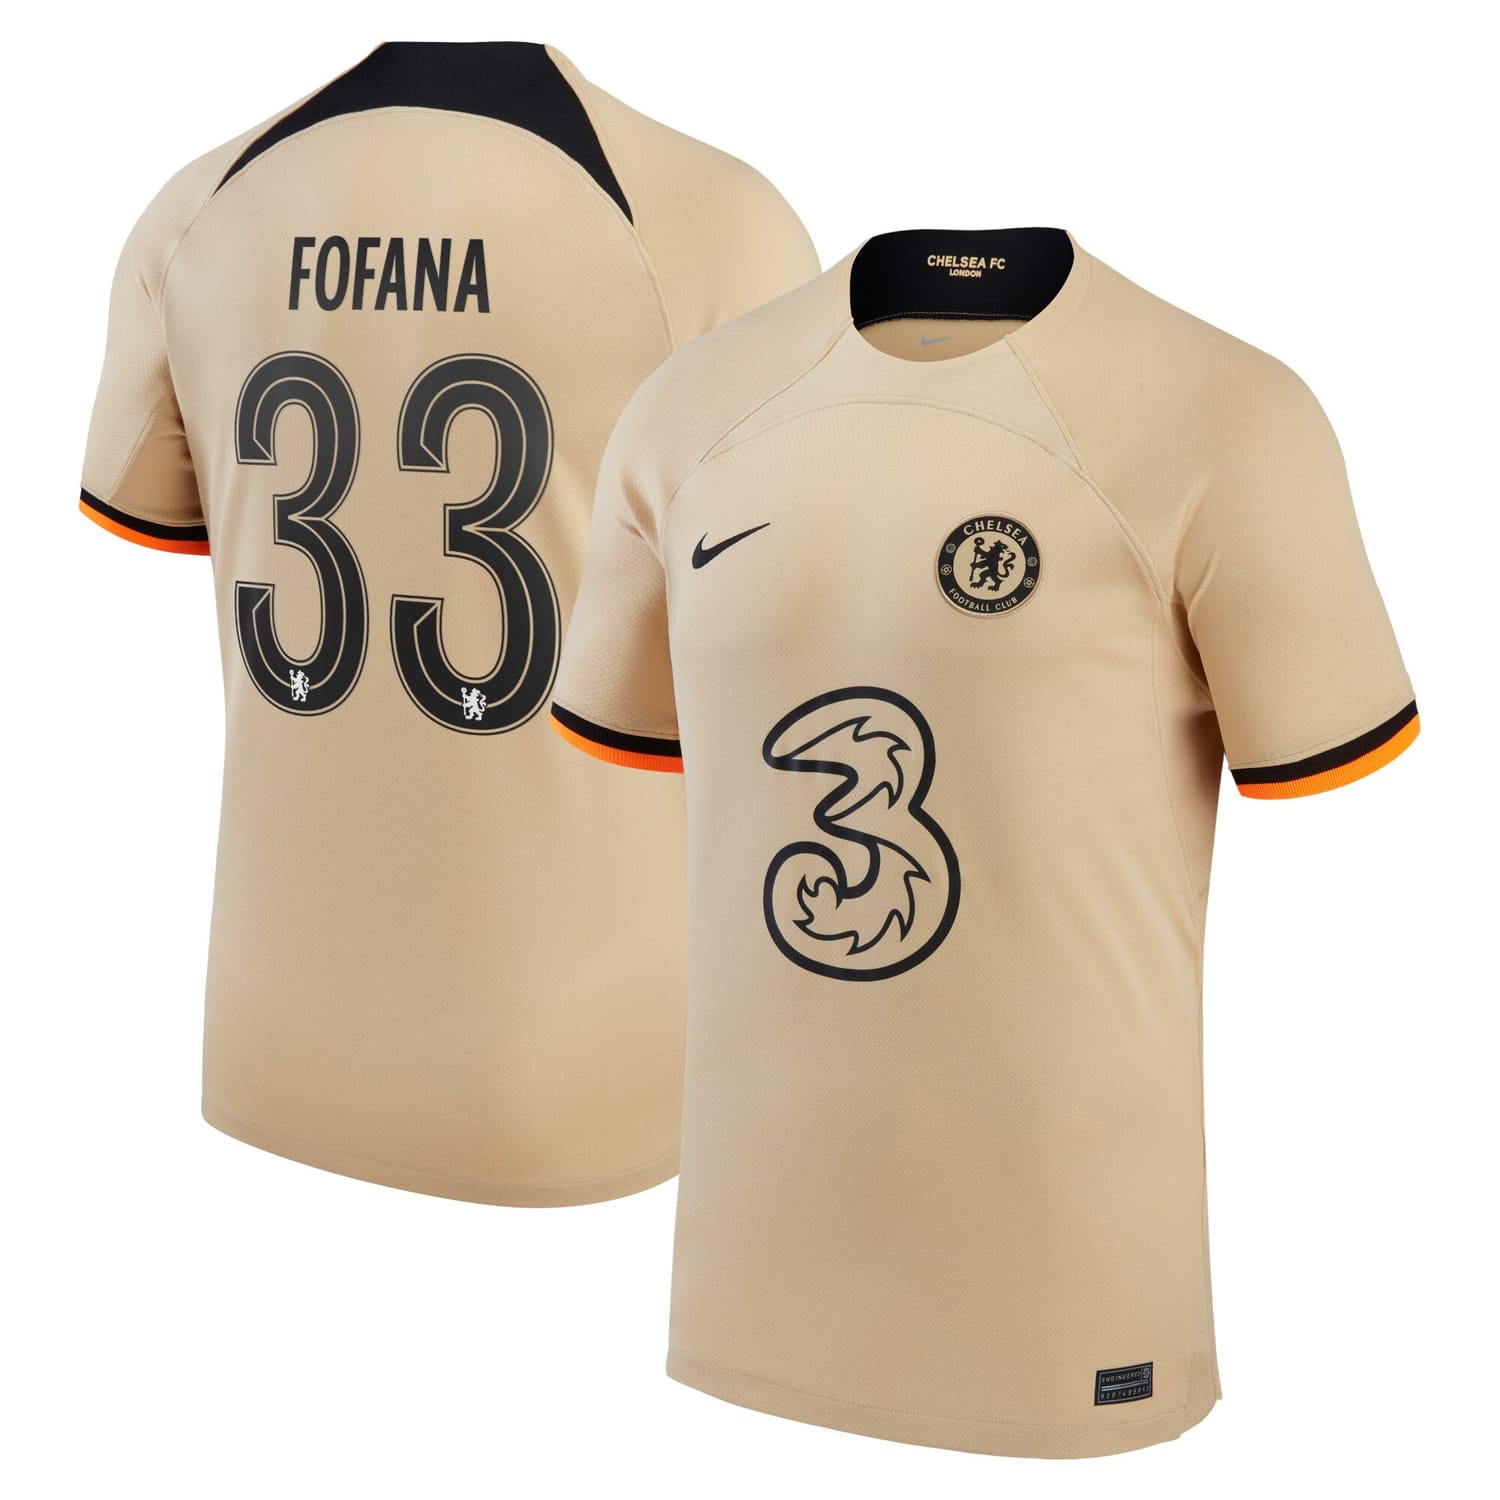 Premier League Chelsea Third Cup Jersey Shirt 2022-23 player Wesley Fofana 33 printing for Men